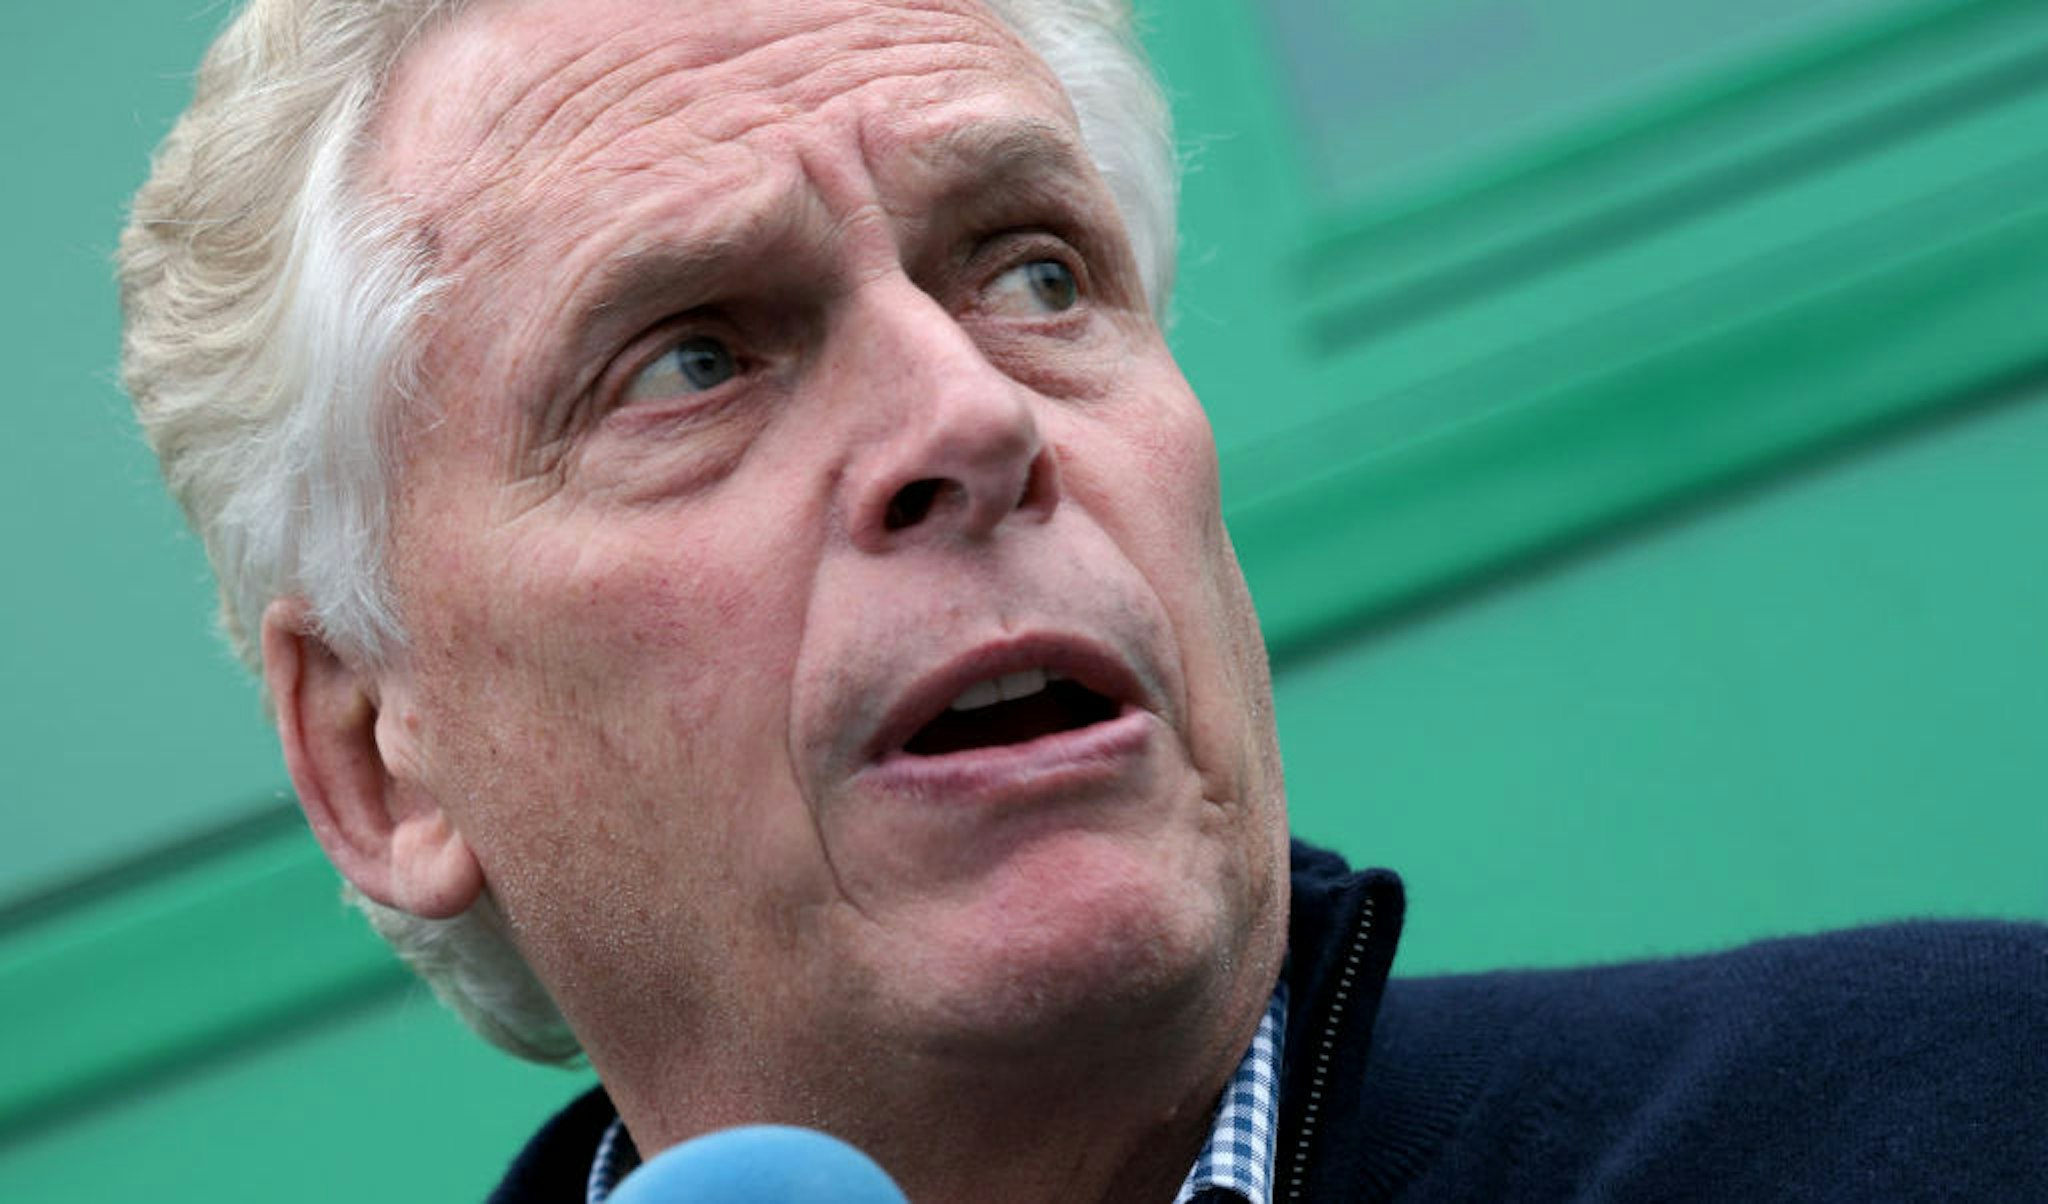 HARRISONBURG, VIRGINIA - OCTOBER 28: Democratic gubernatorial candidate, former Virginia Gov. Terry McAuliffe speaks to supporters at the Harrisonburg-Rockingham County Democratic Party Headquarter during a campaign event October 28, 2021 in Harrisonburg, Virginia. The Virginia gubernatorial election, pitting McAuliffe against Republican candidate Glenn Youngkin, is November 2. (Photo by Win McNamee/Getty Images)